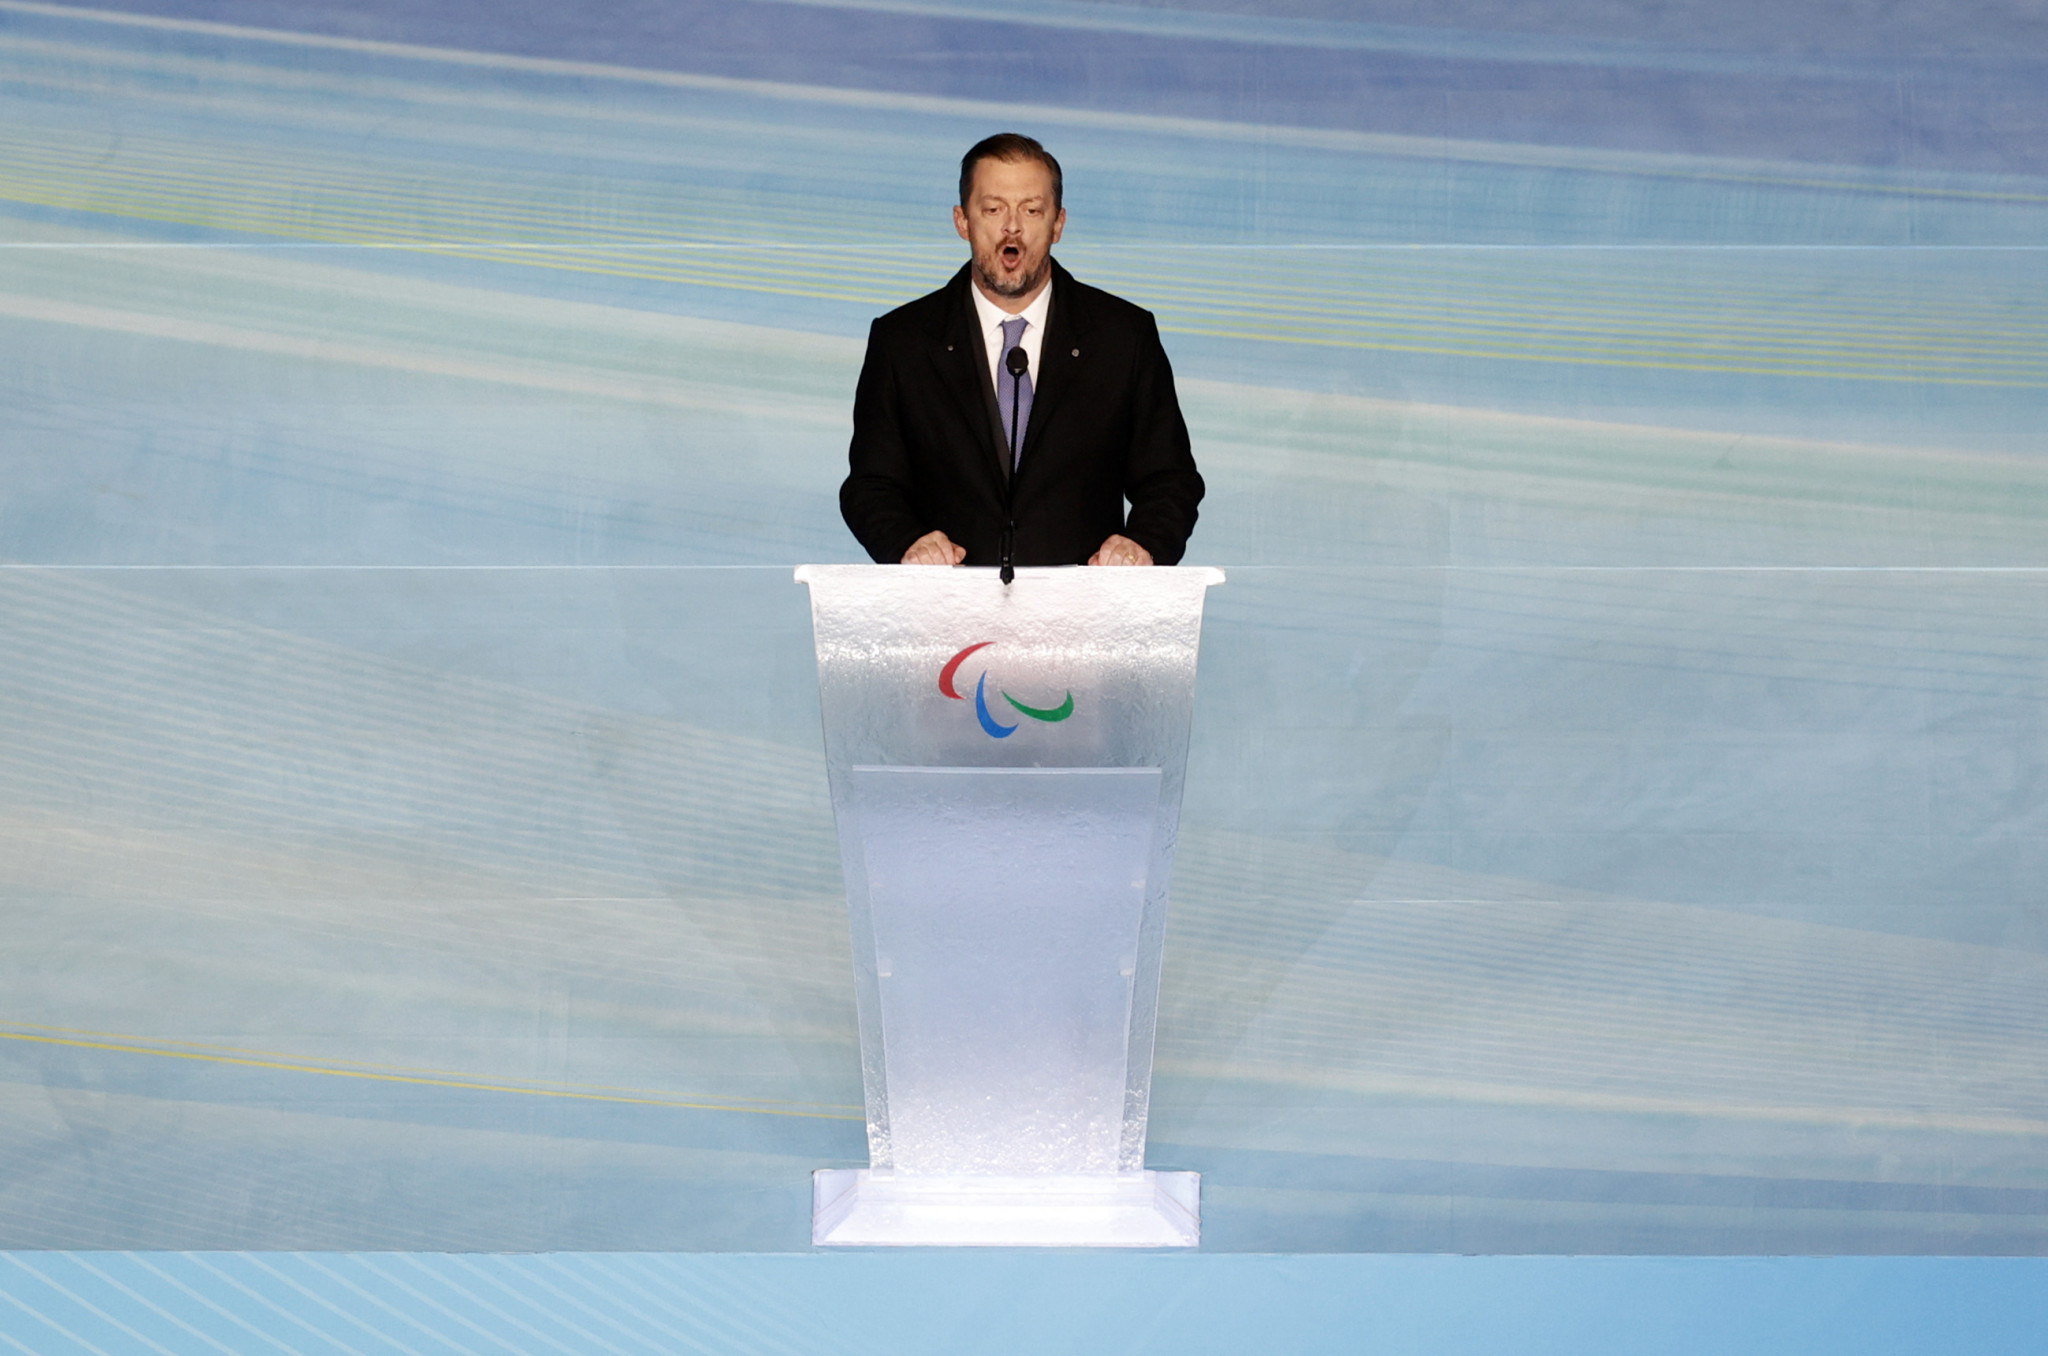 IPC President Andrew Parsons spoke about how Paris 2024 could continue to grow the Paralympic Movement ©Getty Images